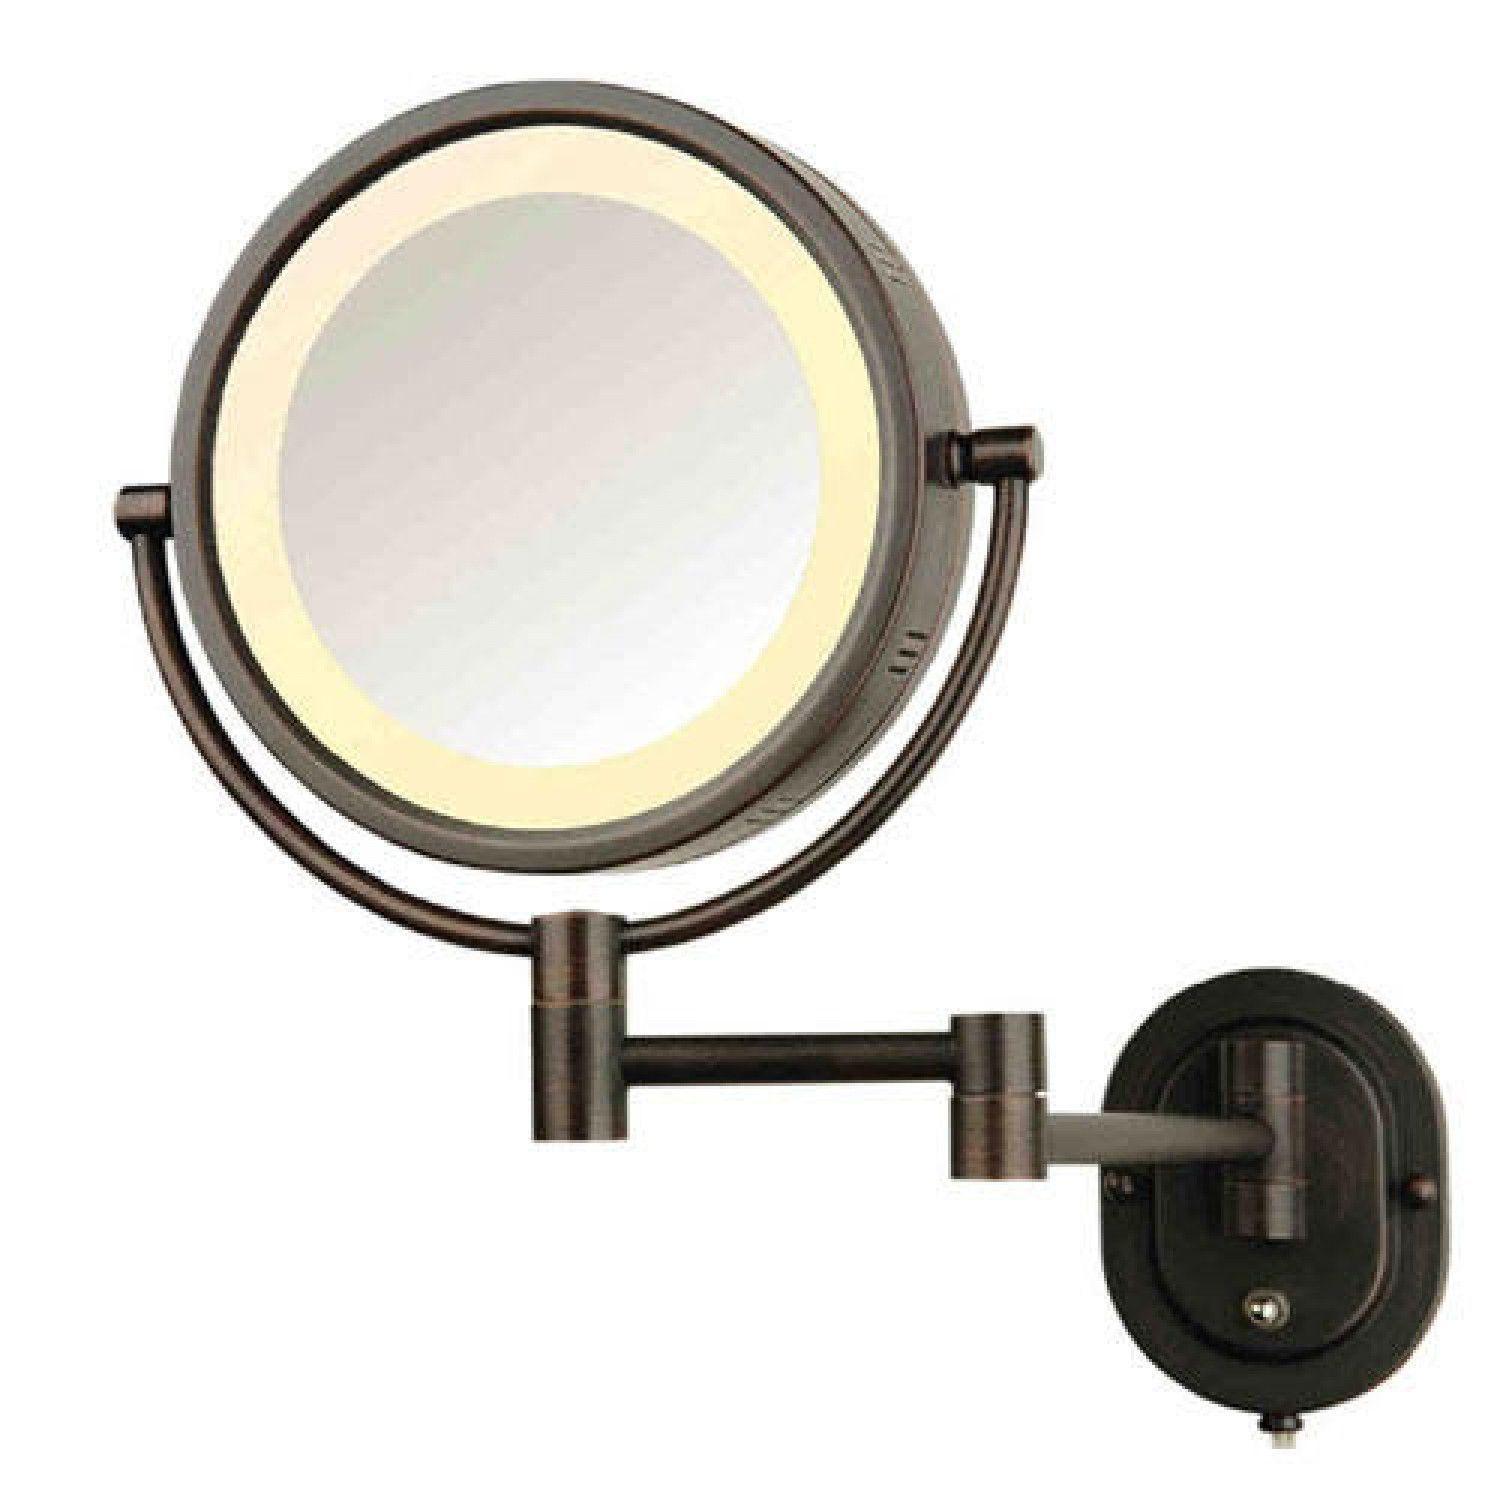 Saint recomended wall Swinging mirror lighted